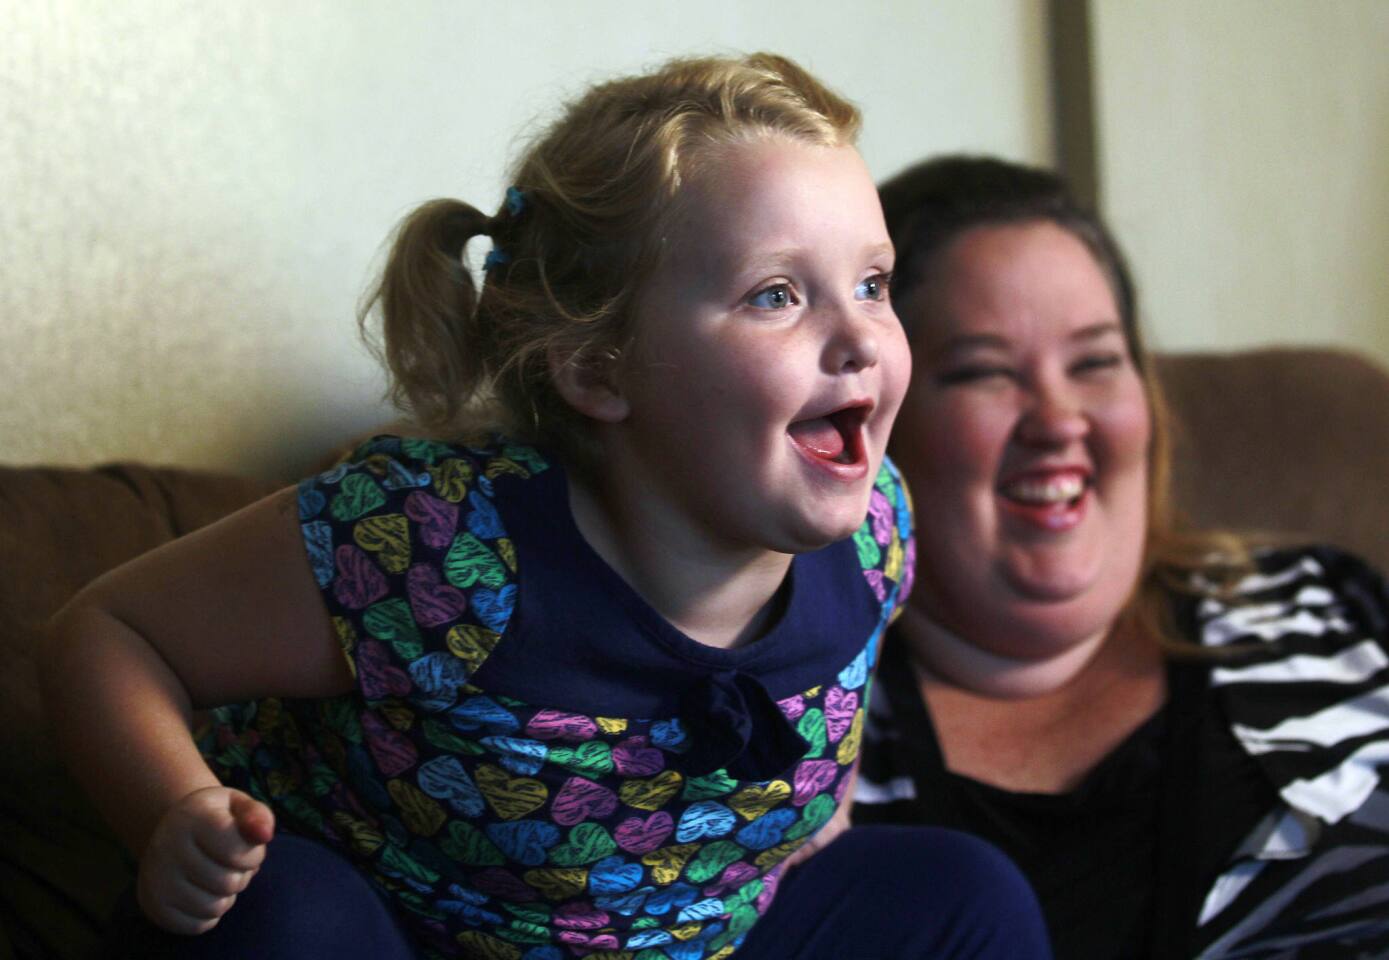 Was "Here Comes Honey Boo Boo" sociology? Mockery? Whatever it was, it is no more.